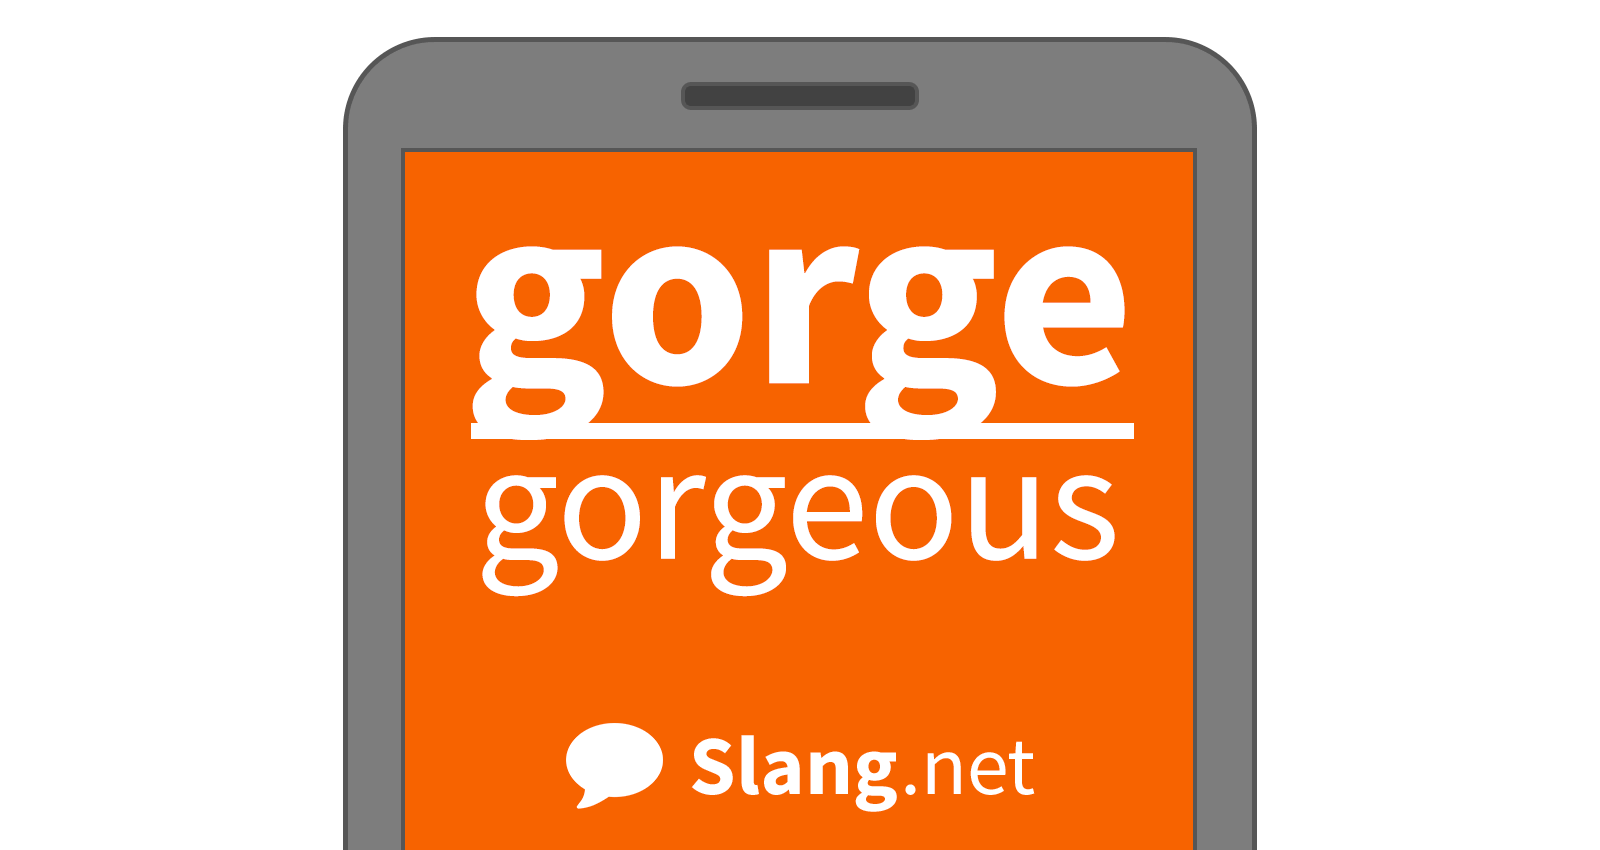 You may see gorge in messages and online, and hear it in real life